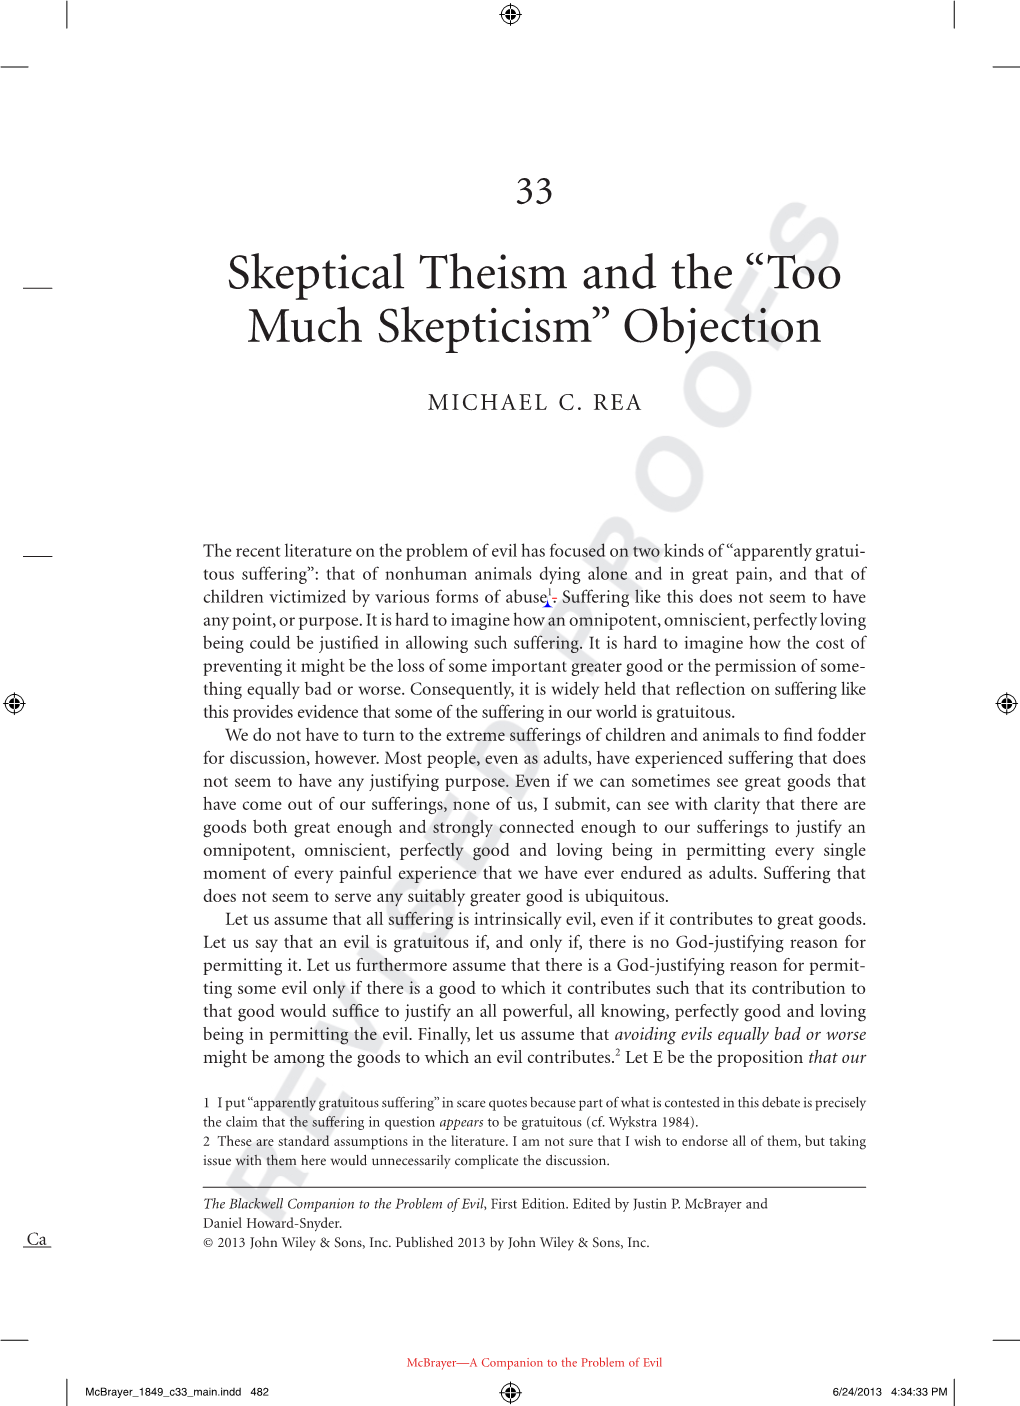 Skeptical Theism and the “Too Much Skepticism” Objection